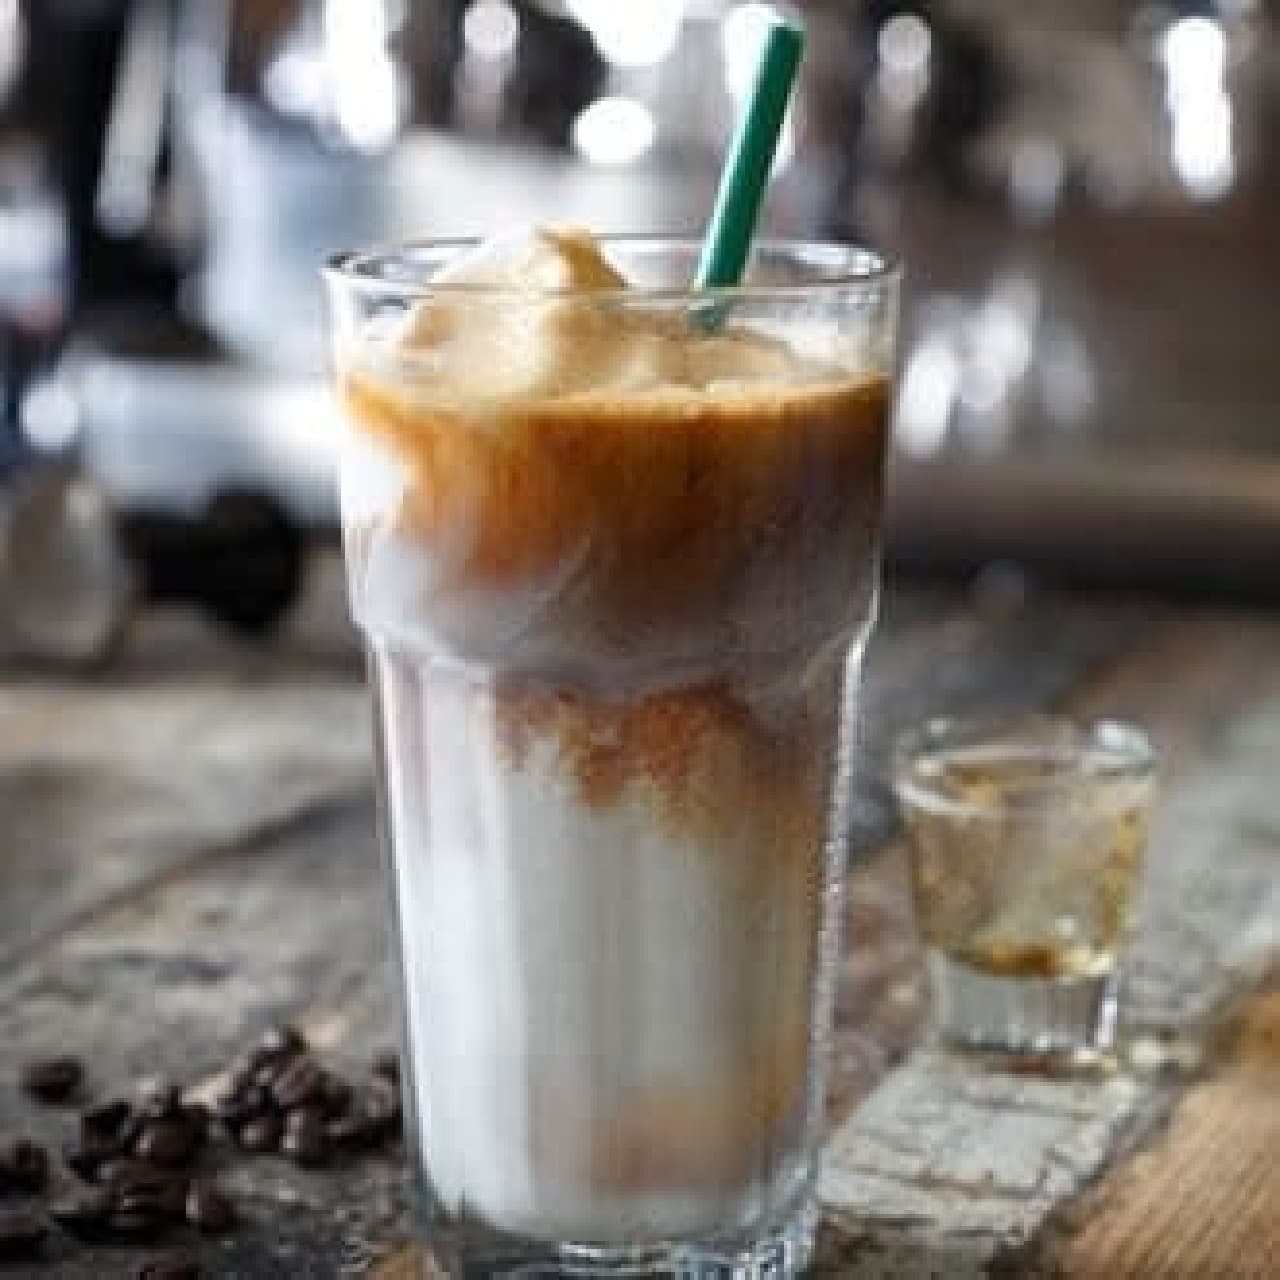 Frappuccino limited to Meguro store is now available! (Source: Starbucks official website)